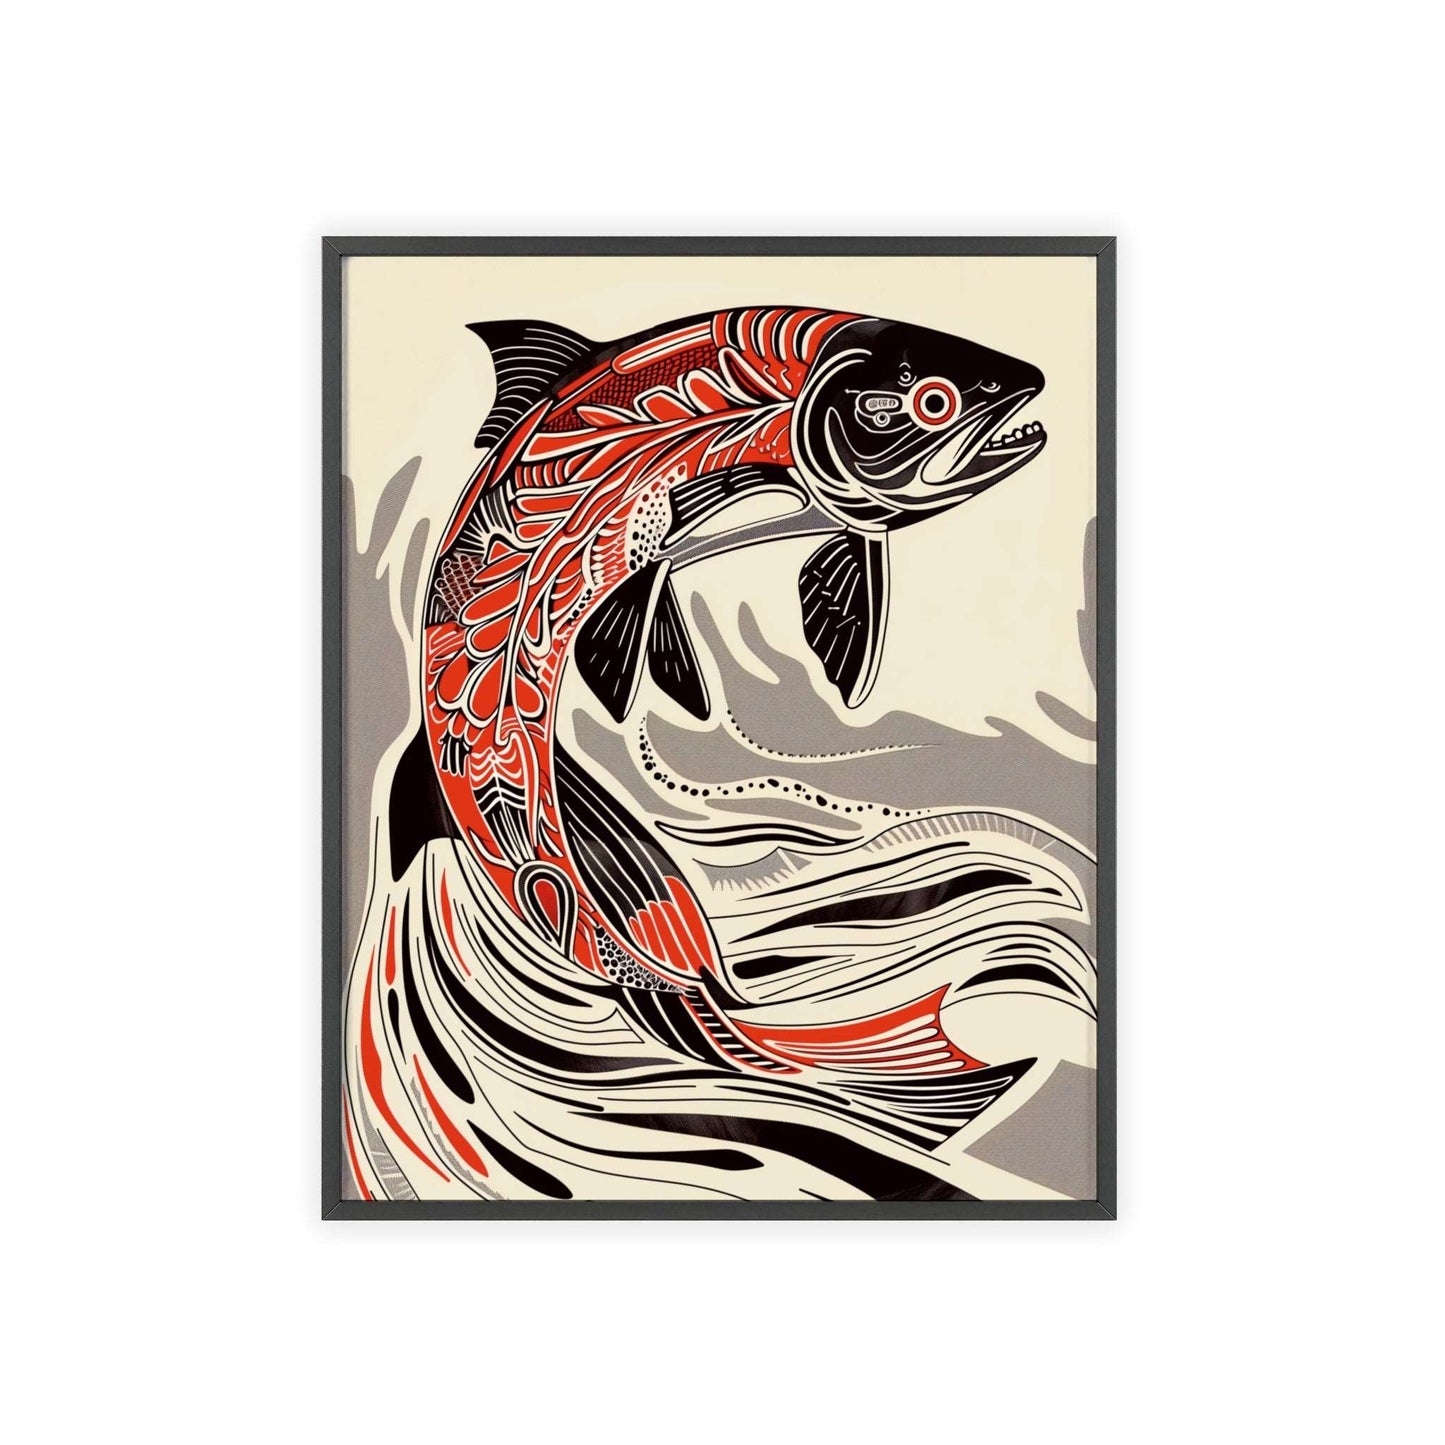 This original wall art, featuring a stunning portrayal of the salmon, injects your modern home decor with a touch of the extraordinary